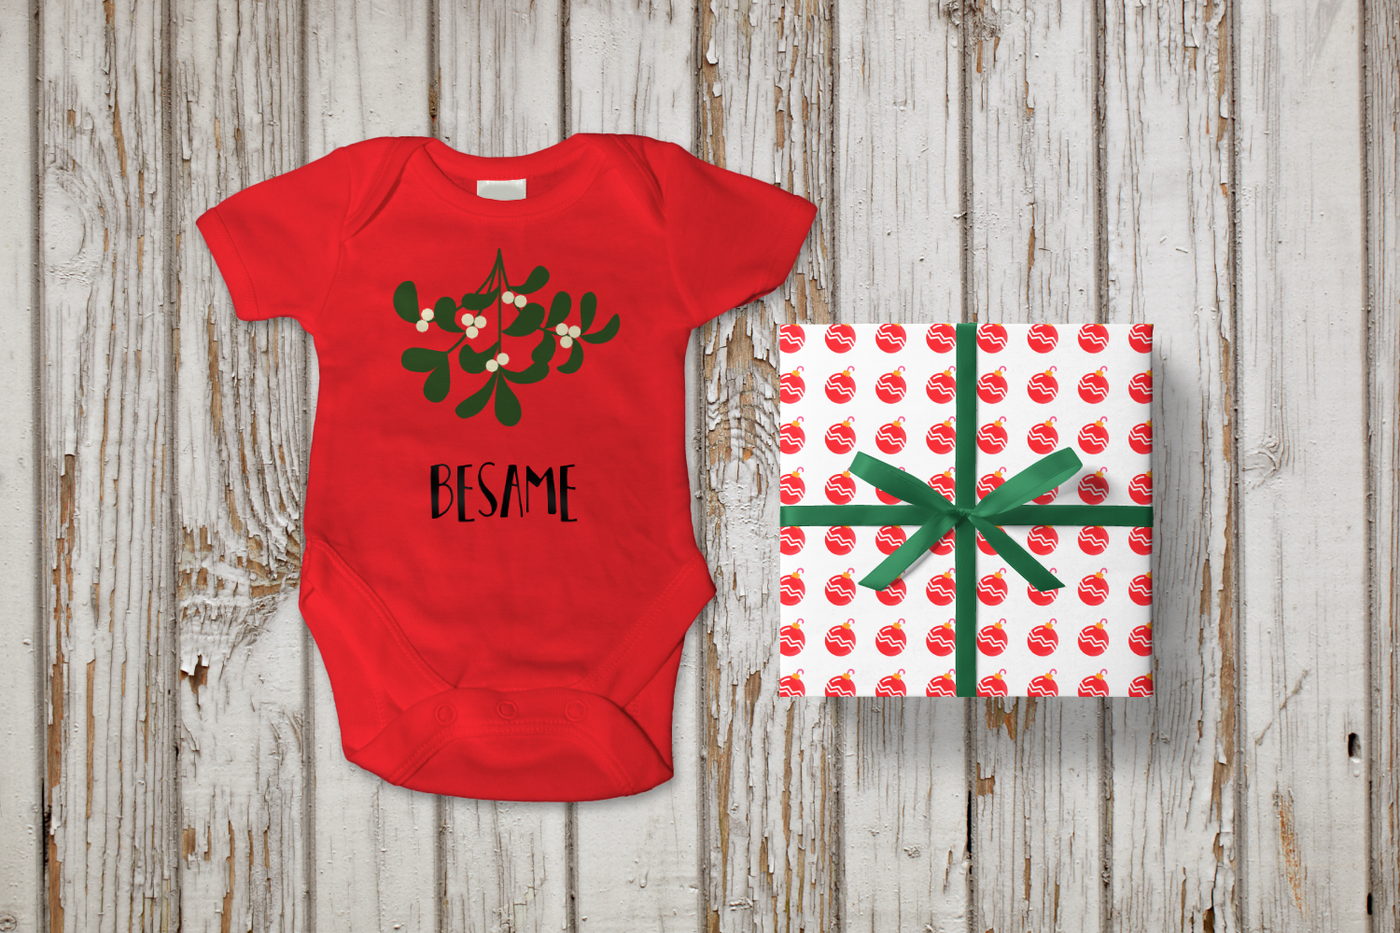 Red baby onesie on a weathered wood background with a wrapped gift next to it. The onesie has a sprig of mistletoe with the word "besame" below.